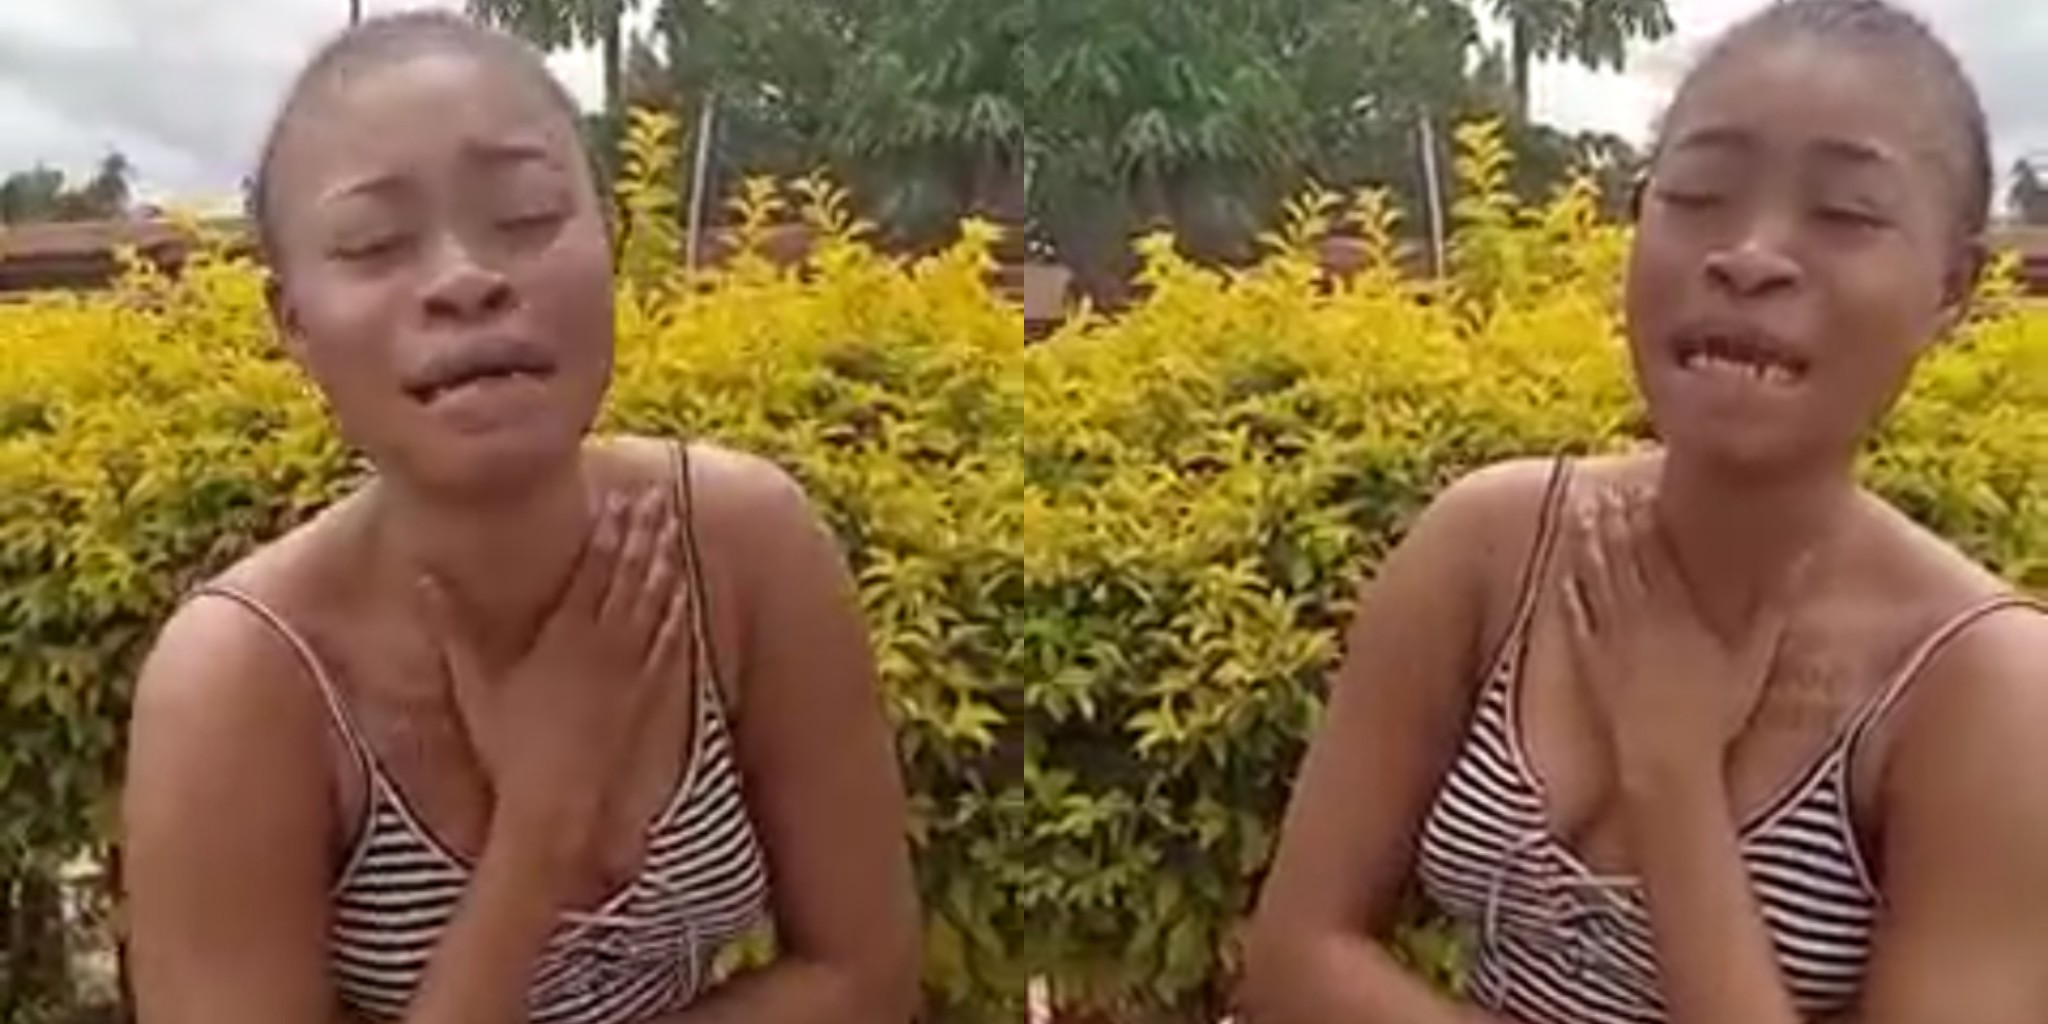 “I Will Only be Having S8x With My Husband” – Sierra Leonean Lady Shed Tears Ahead of Wedding Day